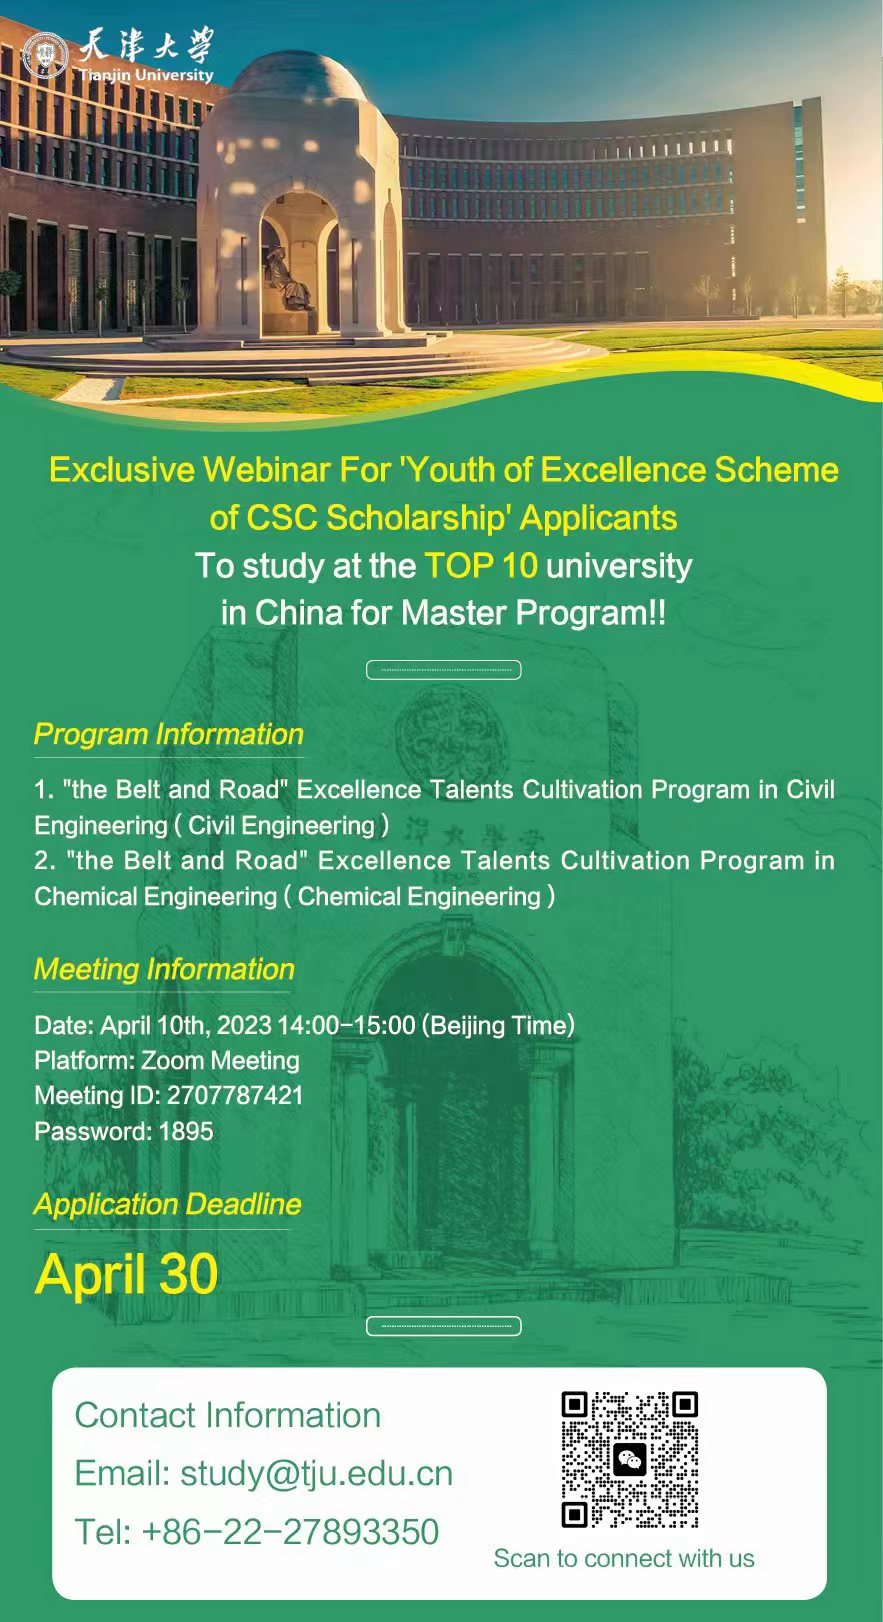 Tianjin University Exclusive Webinar For ‘Youth of Excellence Scheme of CSC Scholarship’ Applicants